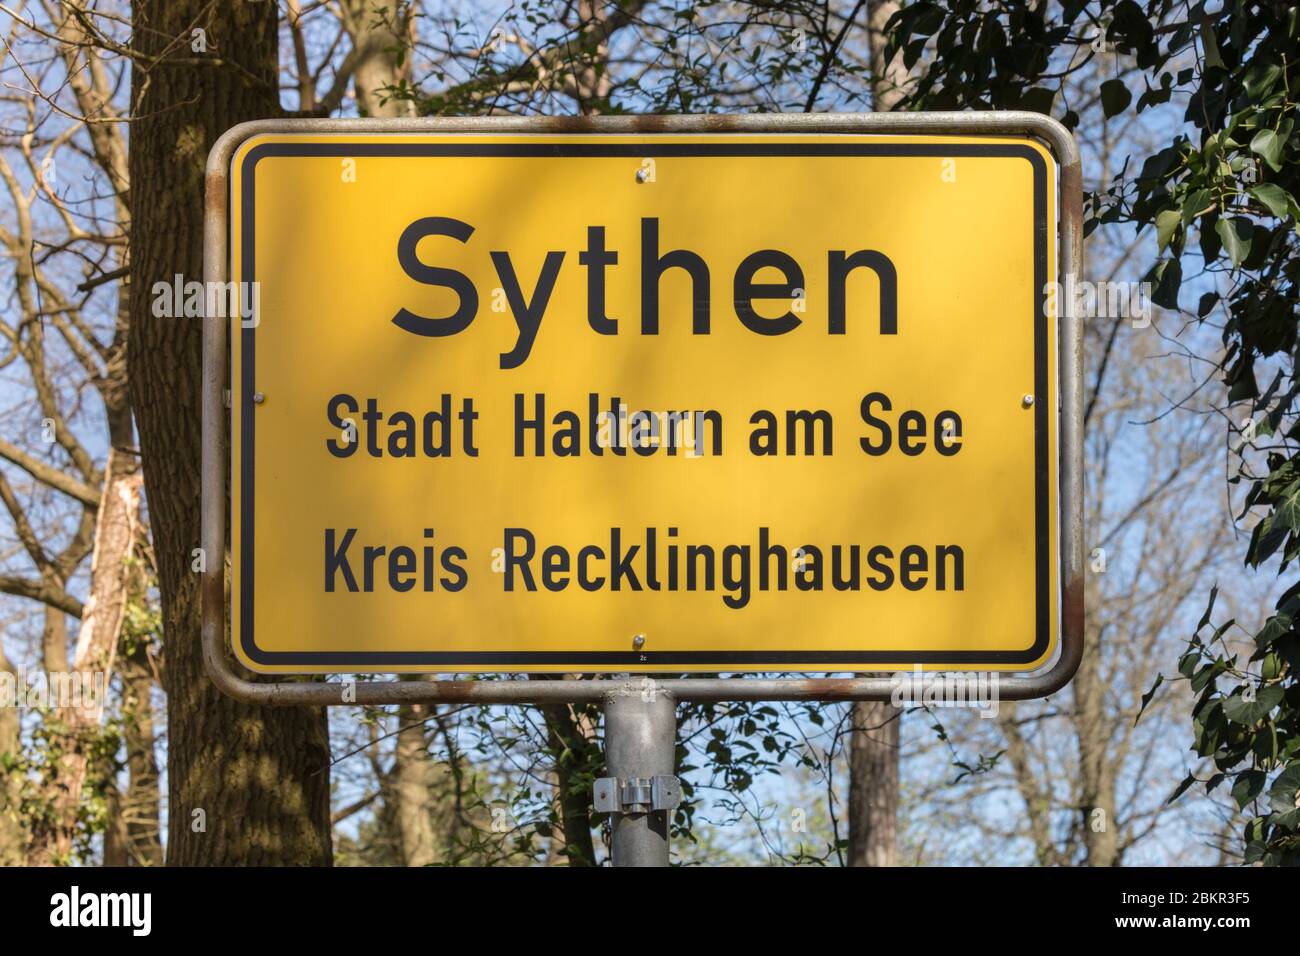 City limit sign or town sign for Sythen, part of Haltern am See, Recklinghausen, NRW, Germany Stock Photo